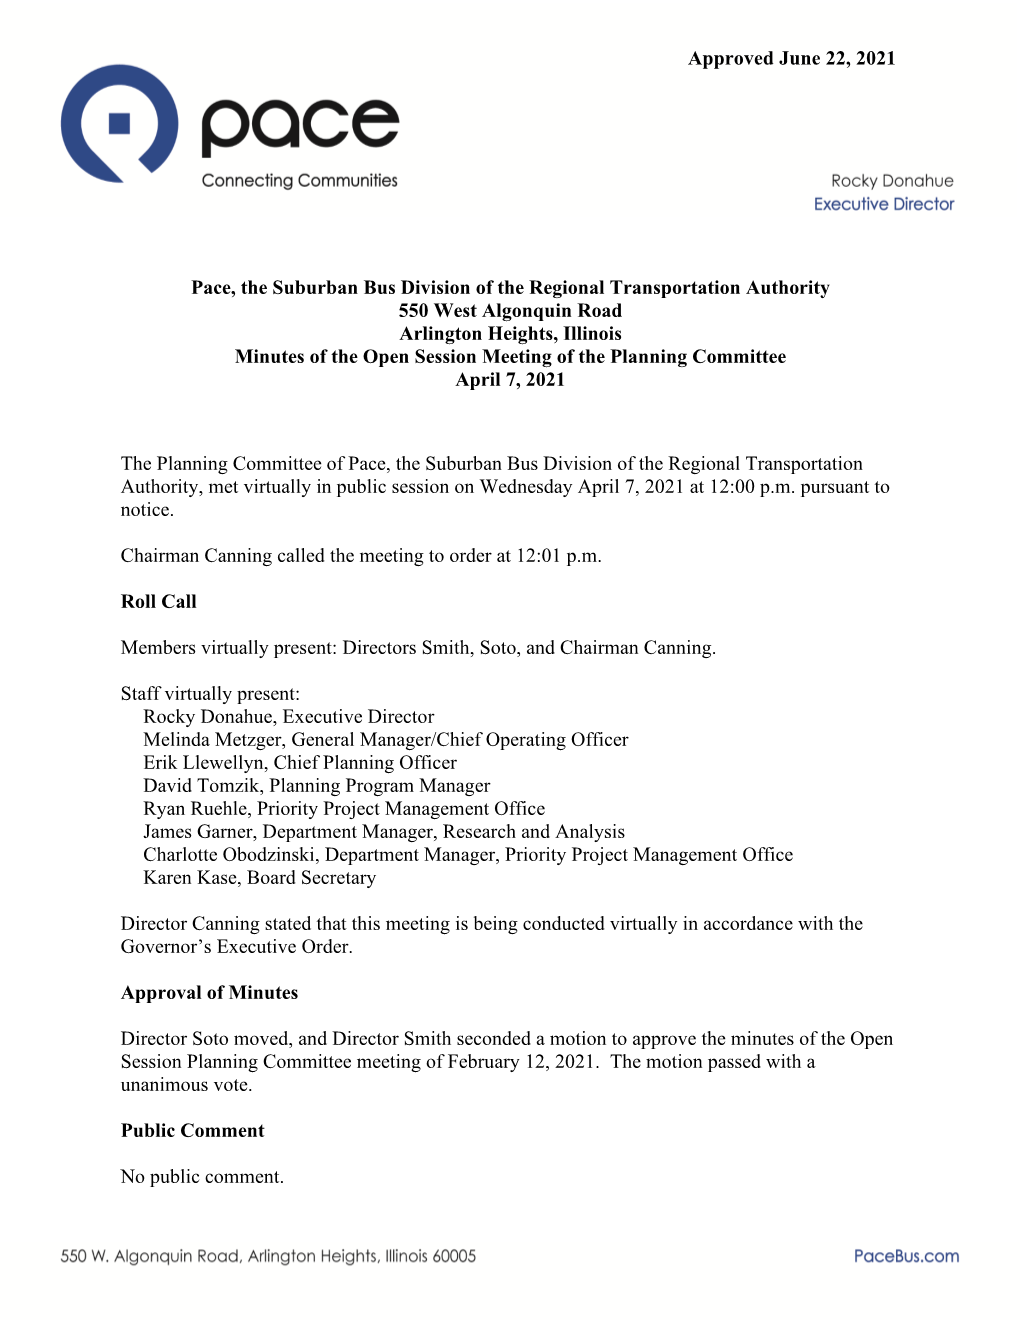 Minutes Planning Committee 4-7-21.Pdf